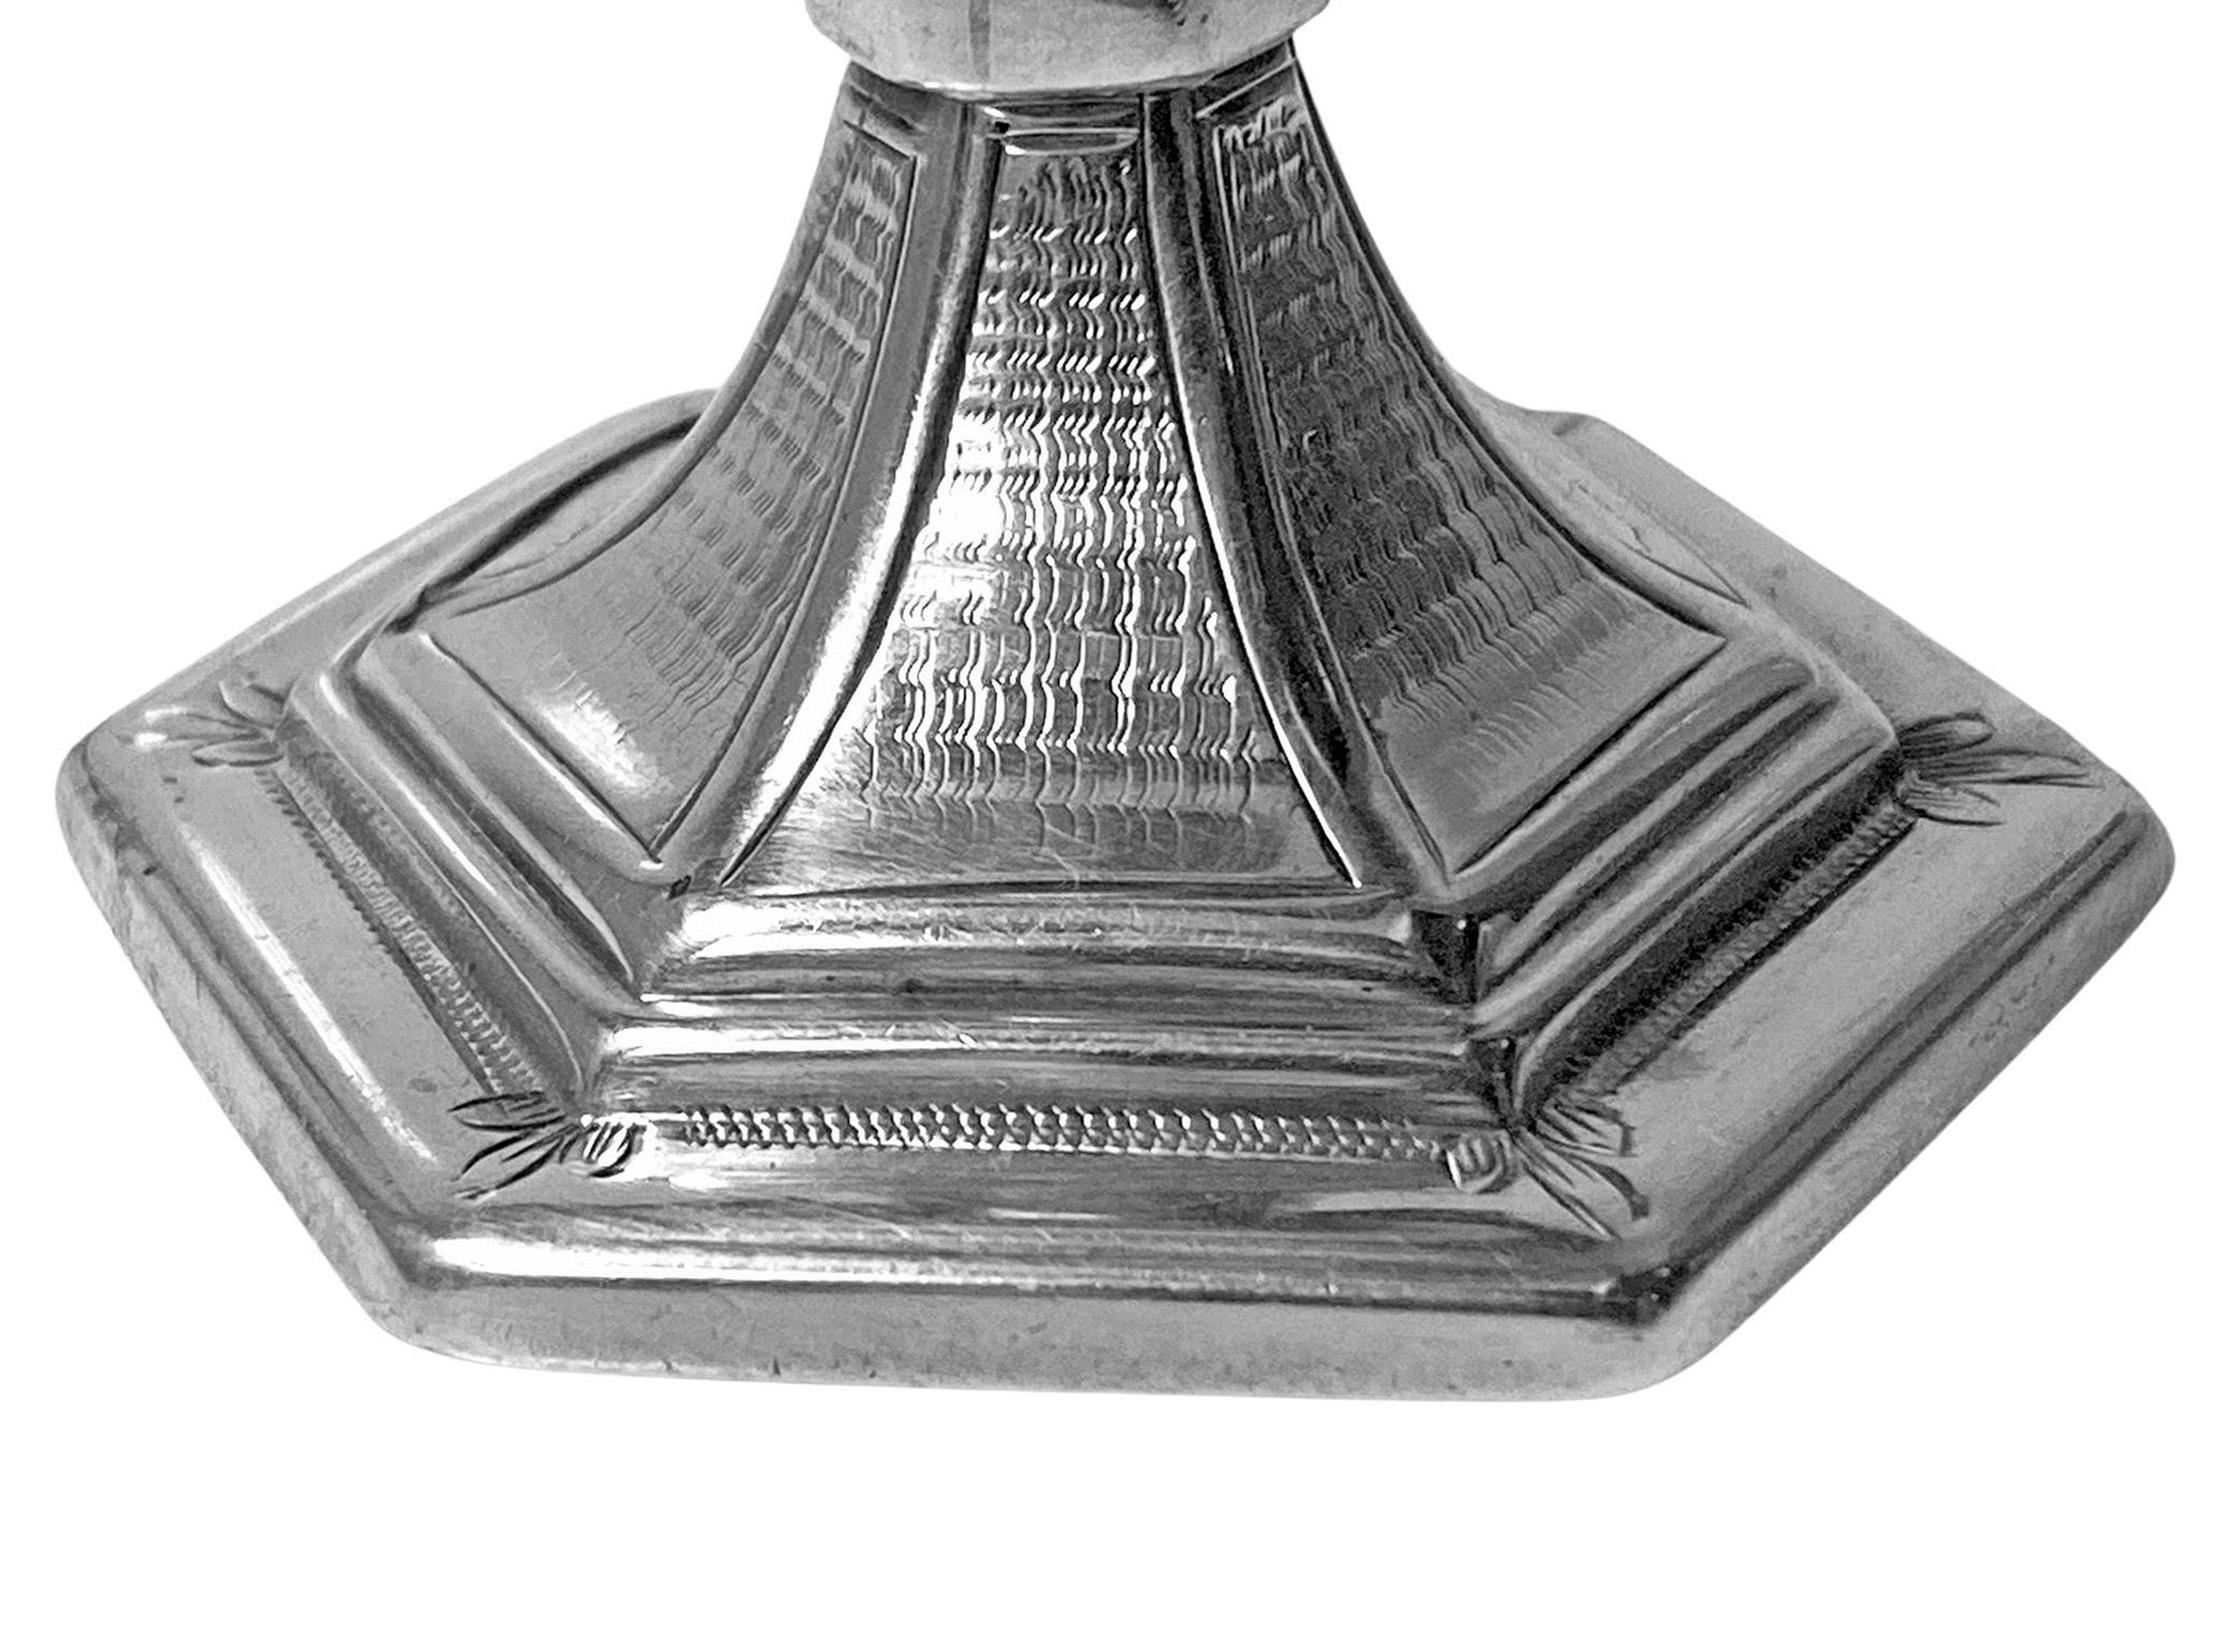 Antique English 19th century sterling silver Pagoda style Pepper Castor Birmingham 1859 Aston & Son. Hexagonal shape, the panels engraved textured design, one panel with vacant wreath ribbon cartouche, detachable cover with pierced foliate design.